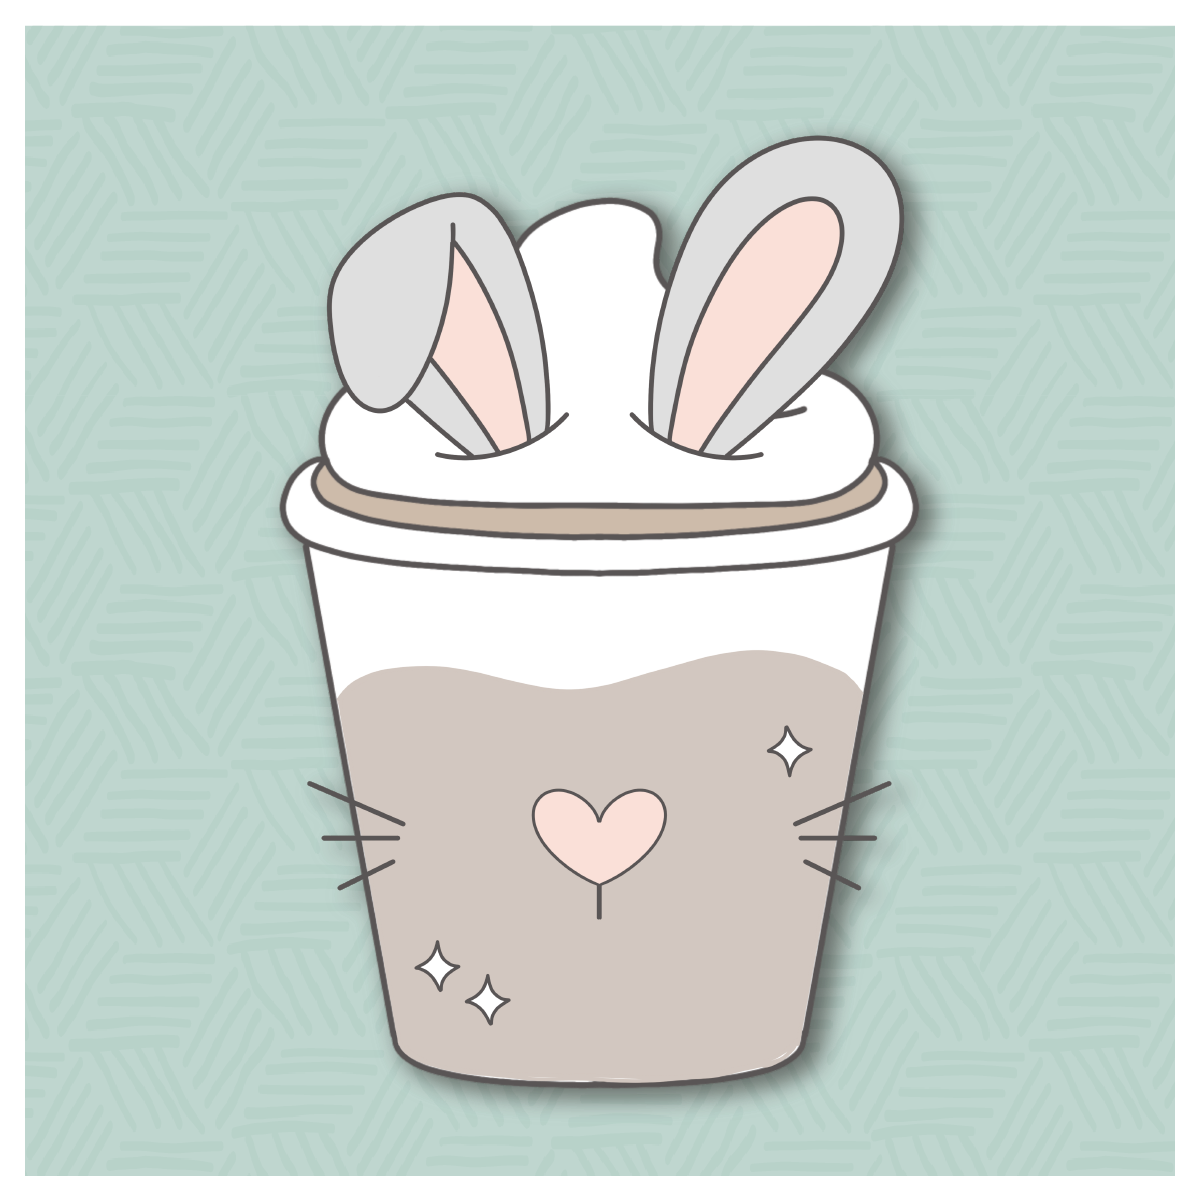 Bunny Latte 1 Cookie Cutter